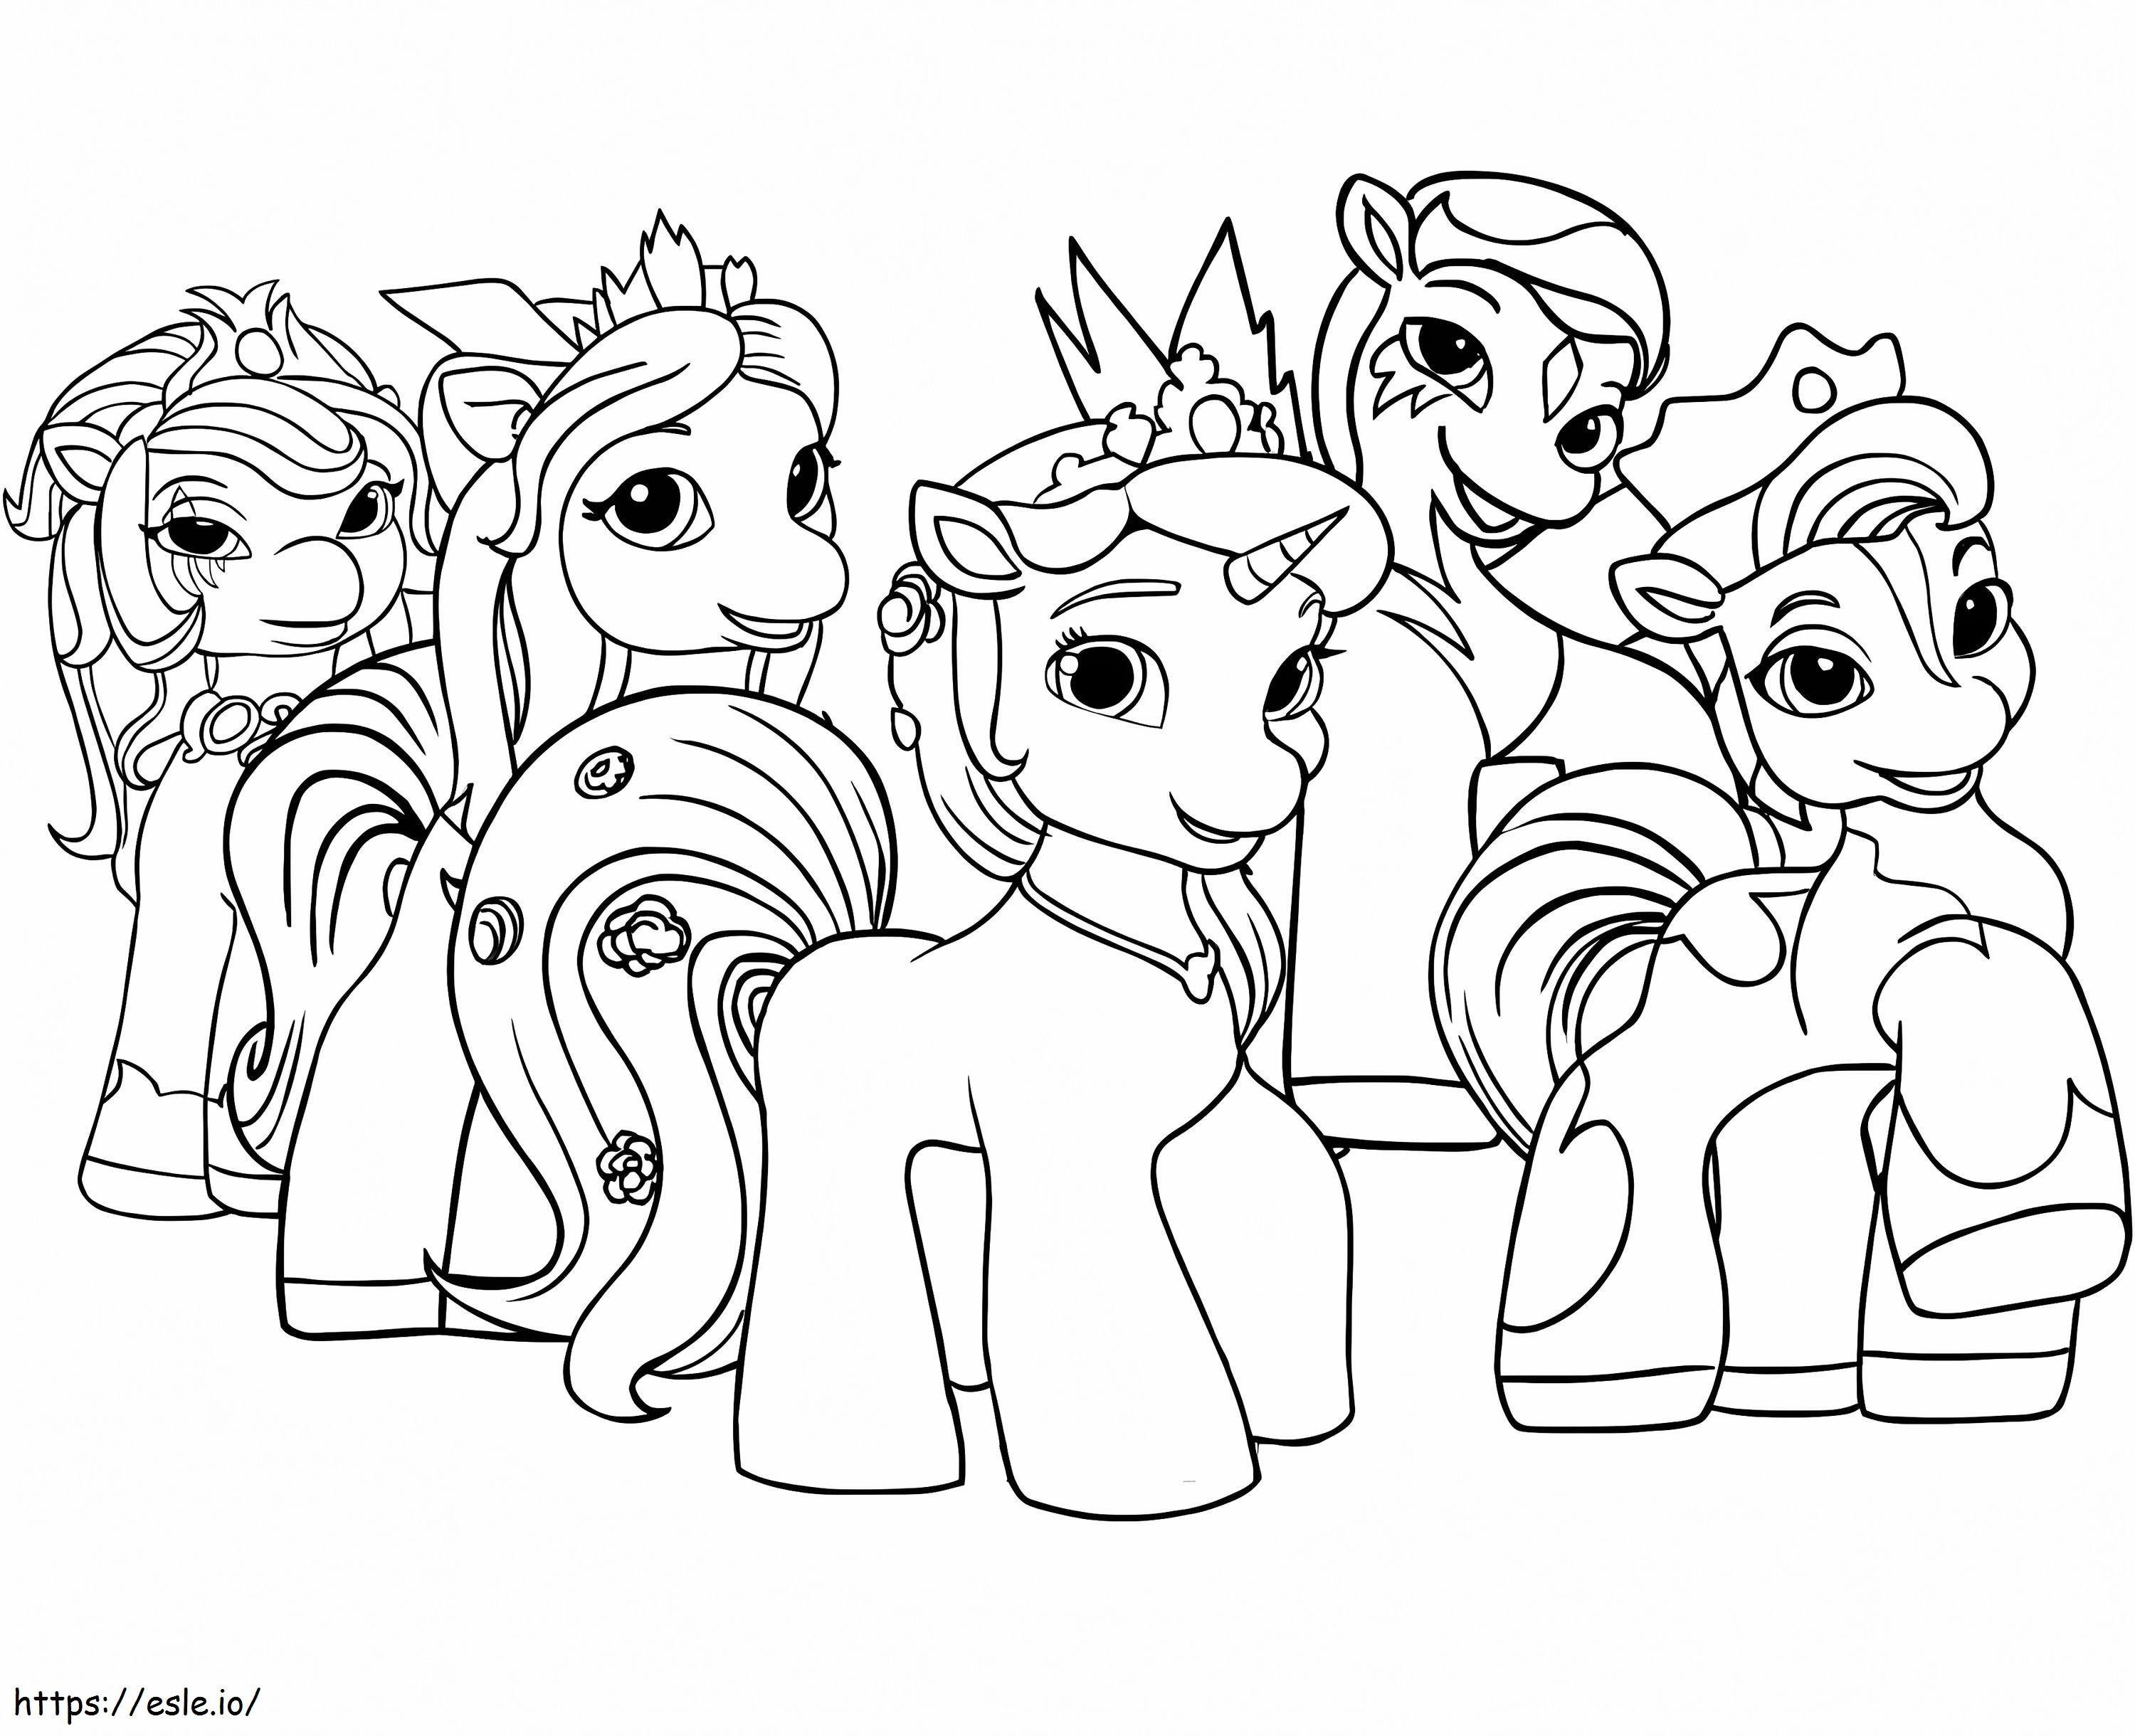 Characters From Filly Funtasia coloring page